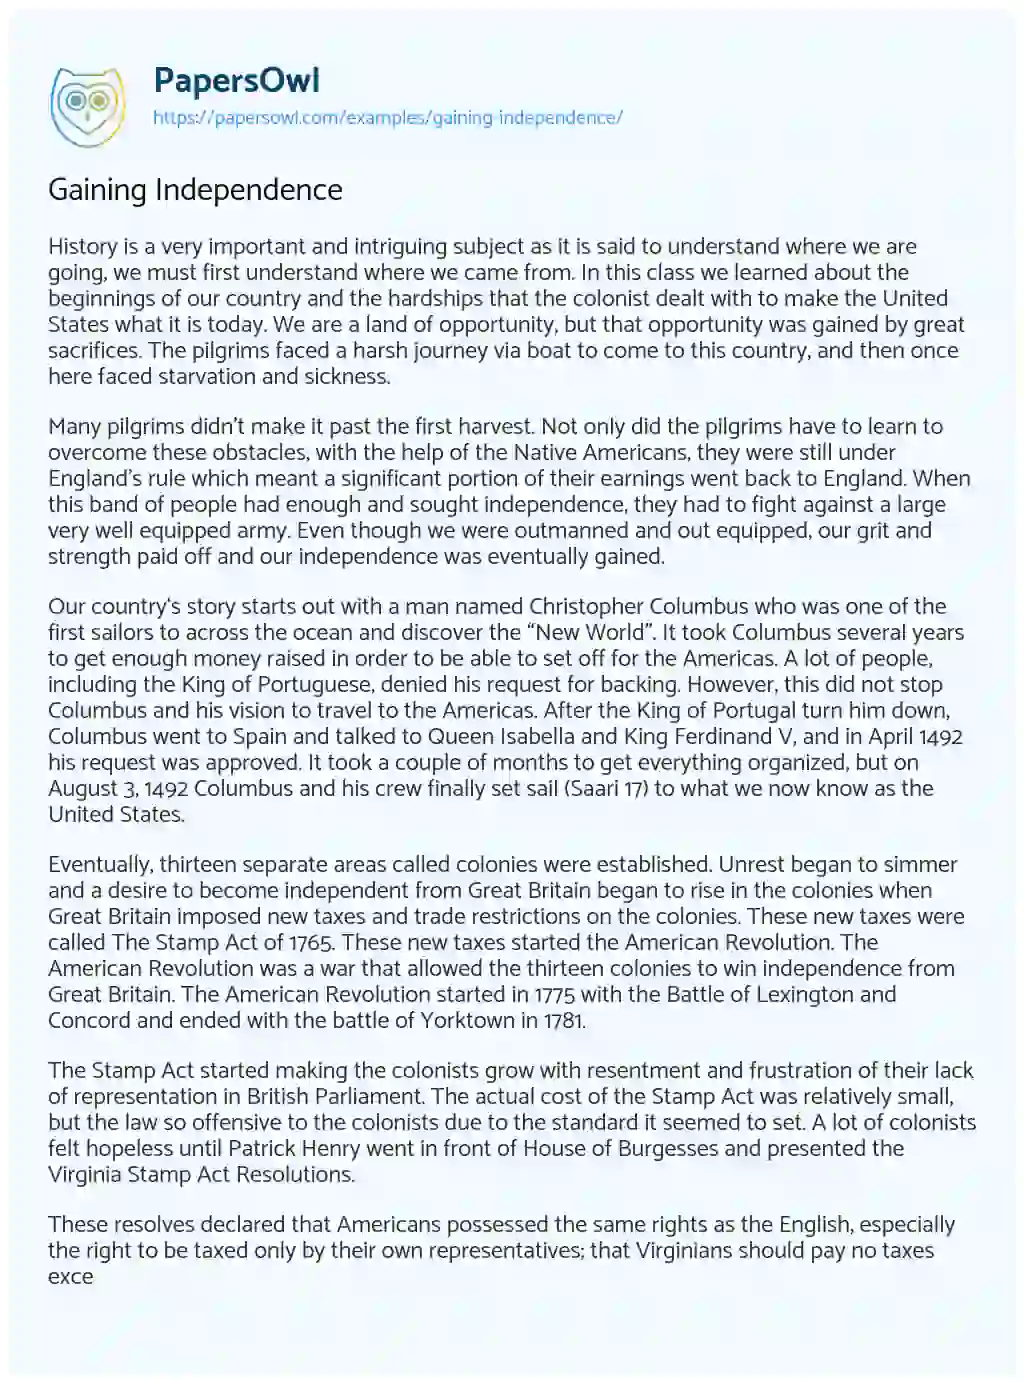 Essay on Gaining Independence